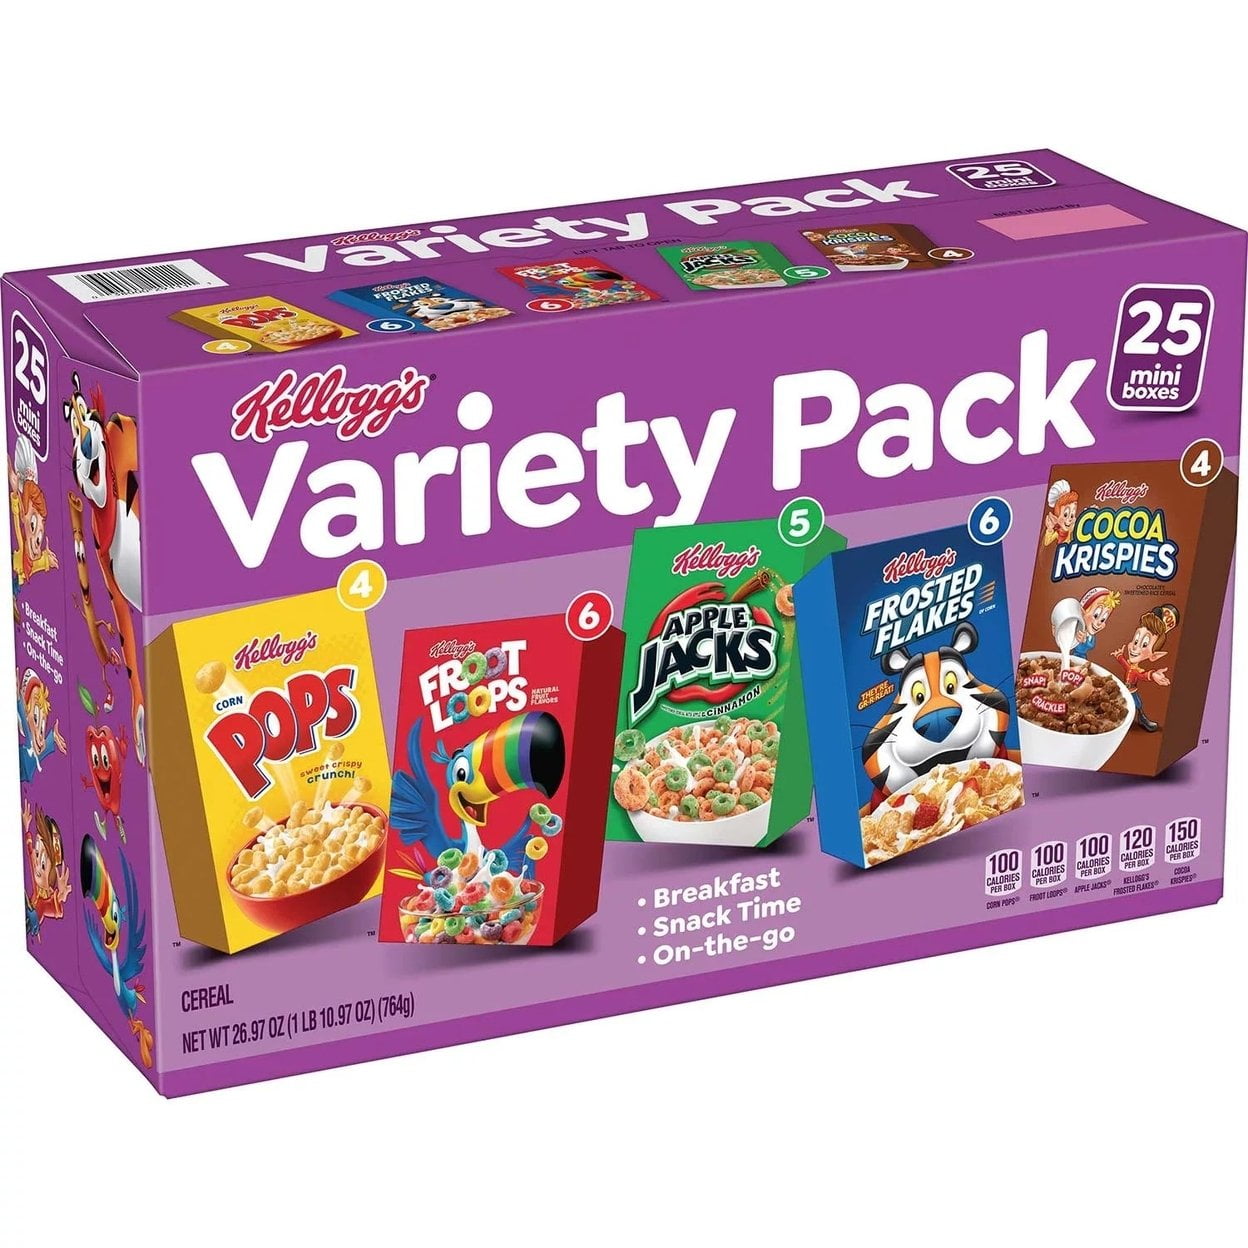 Cereal Eats: Are Mini Box Variety Packs a Blessing or a Curse?